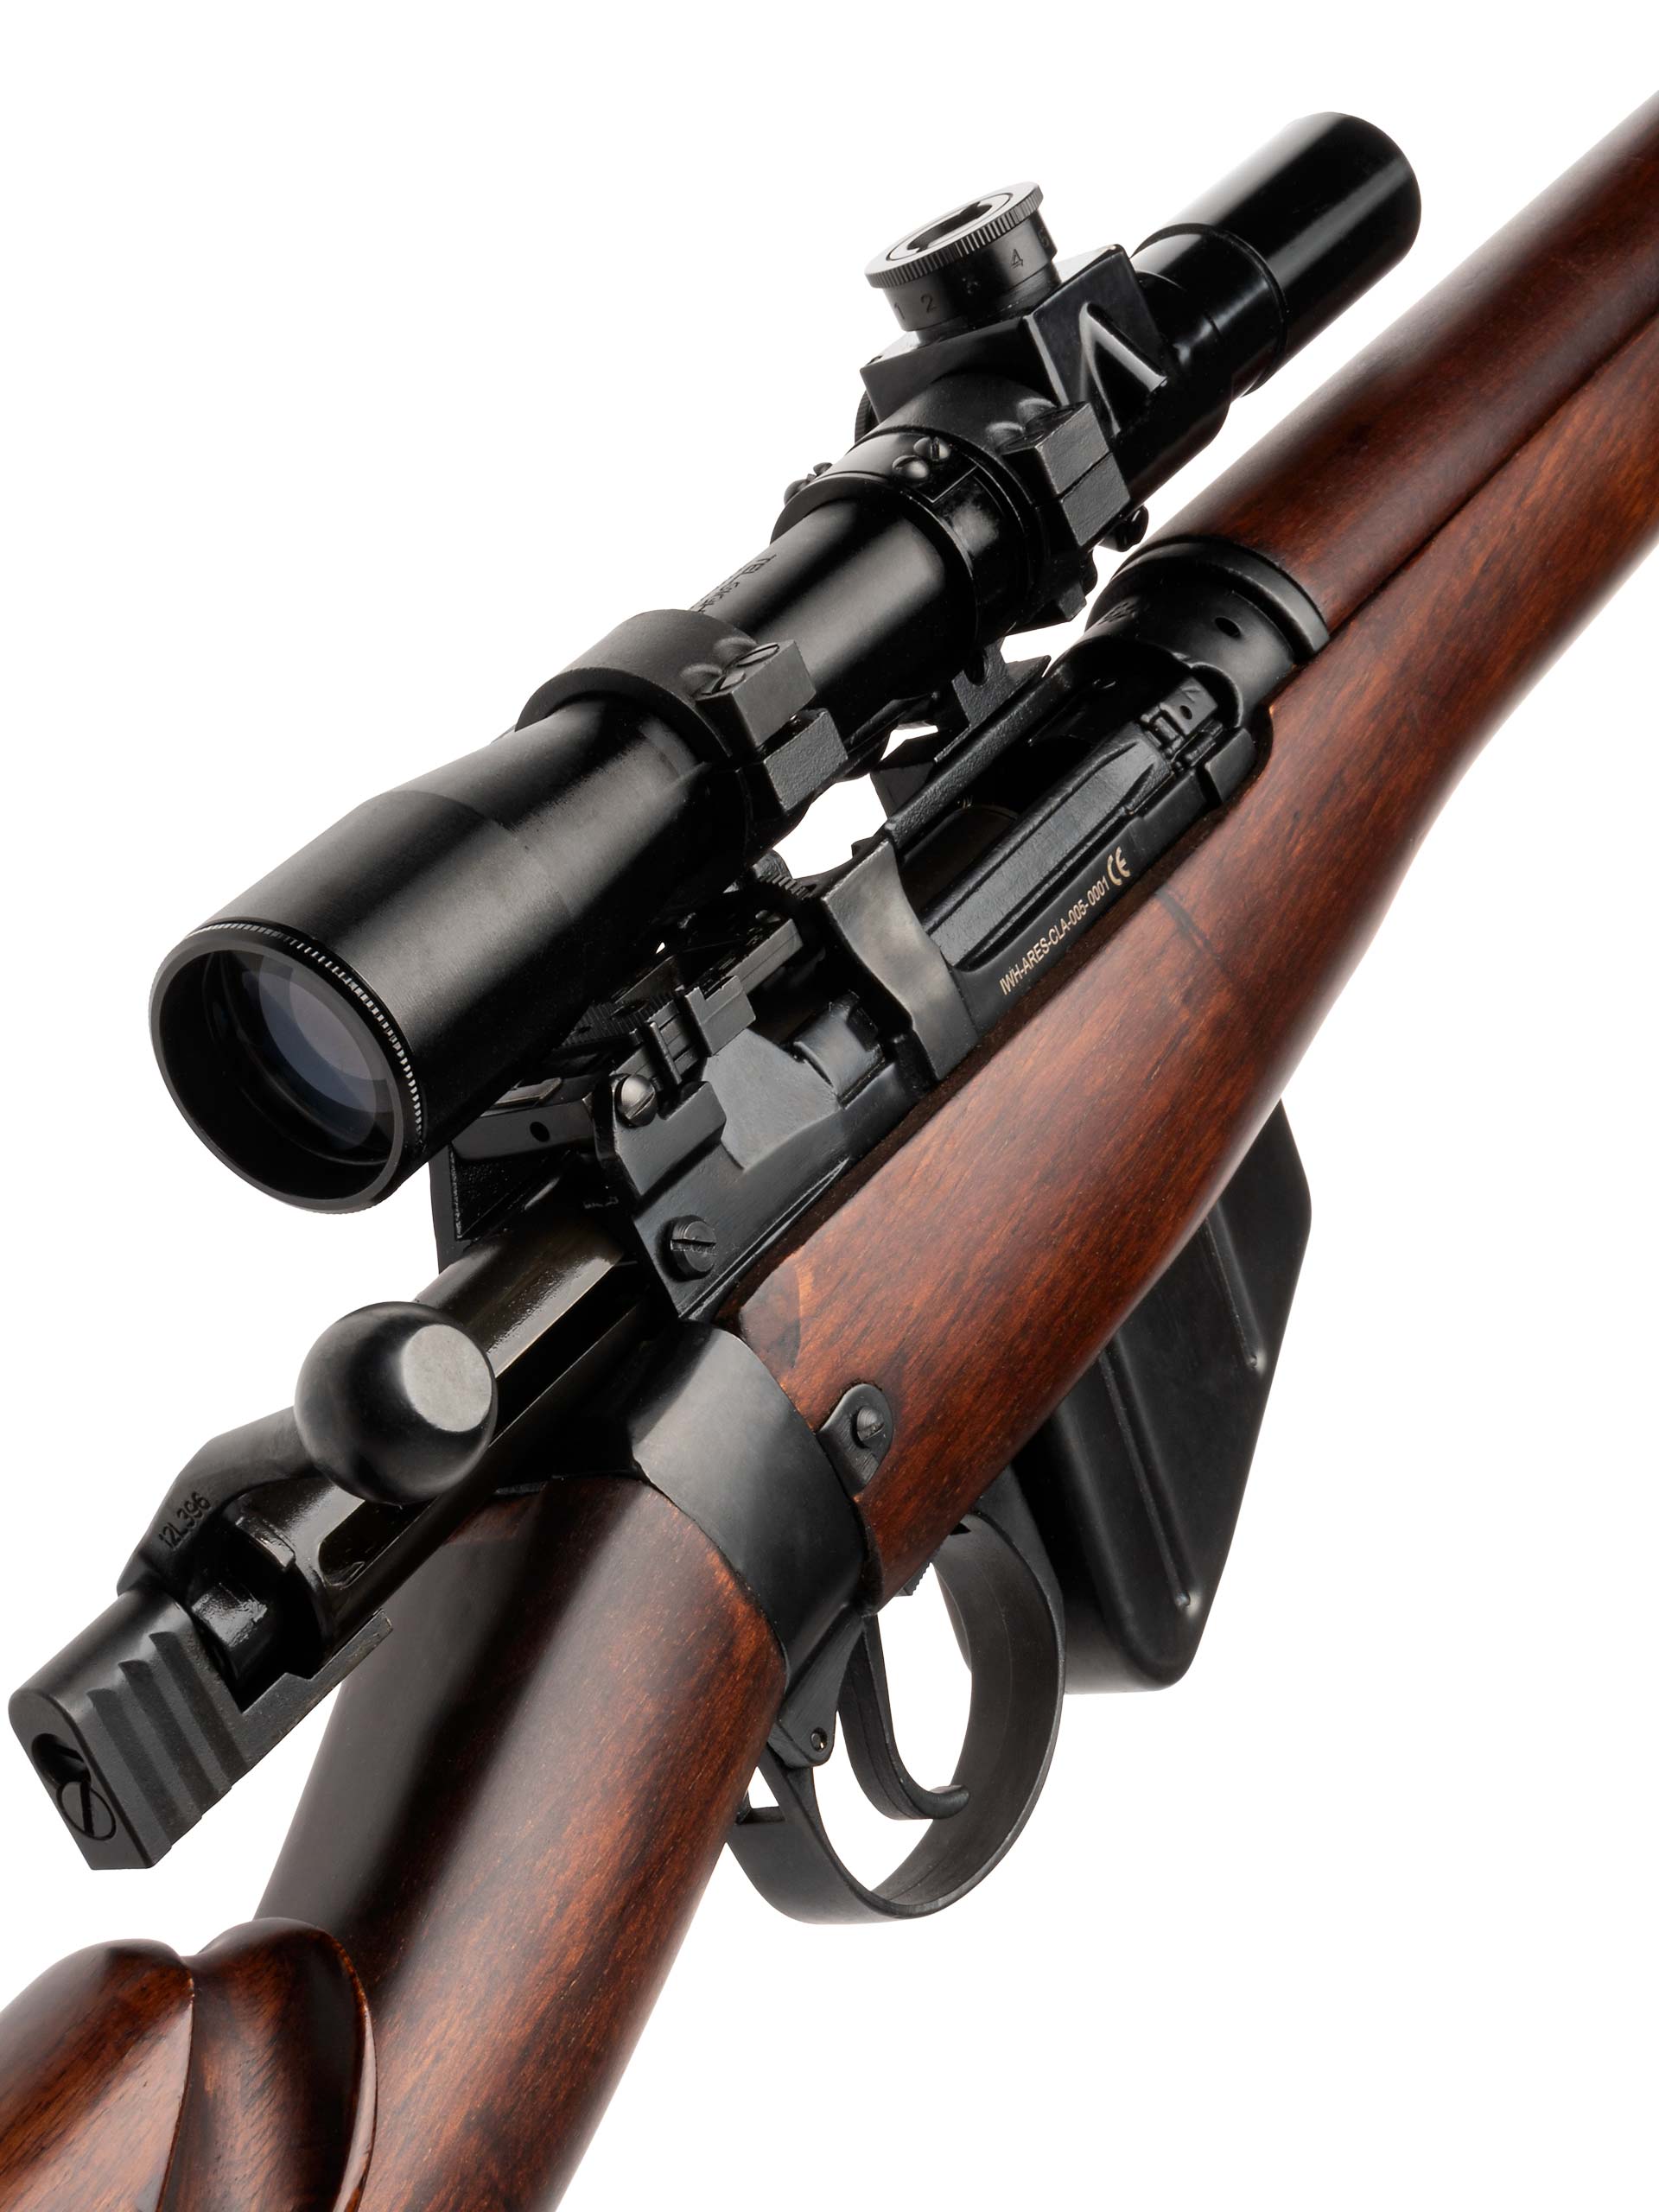 The L42A1: Last Lee-Enfield Sniper Rifle!